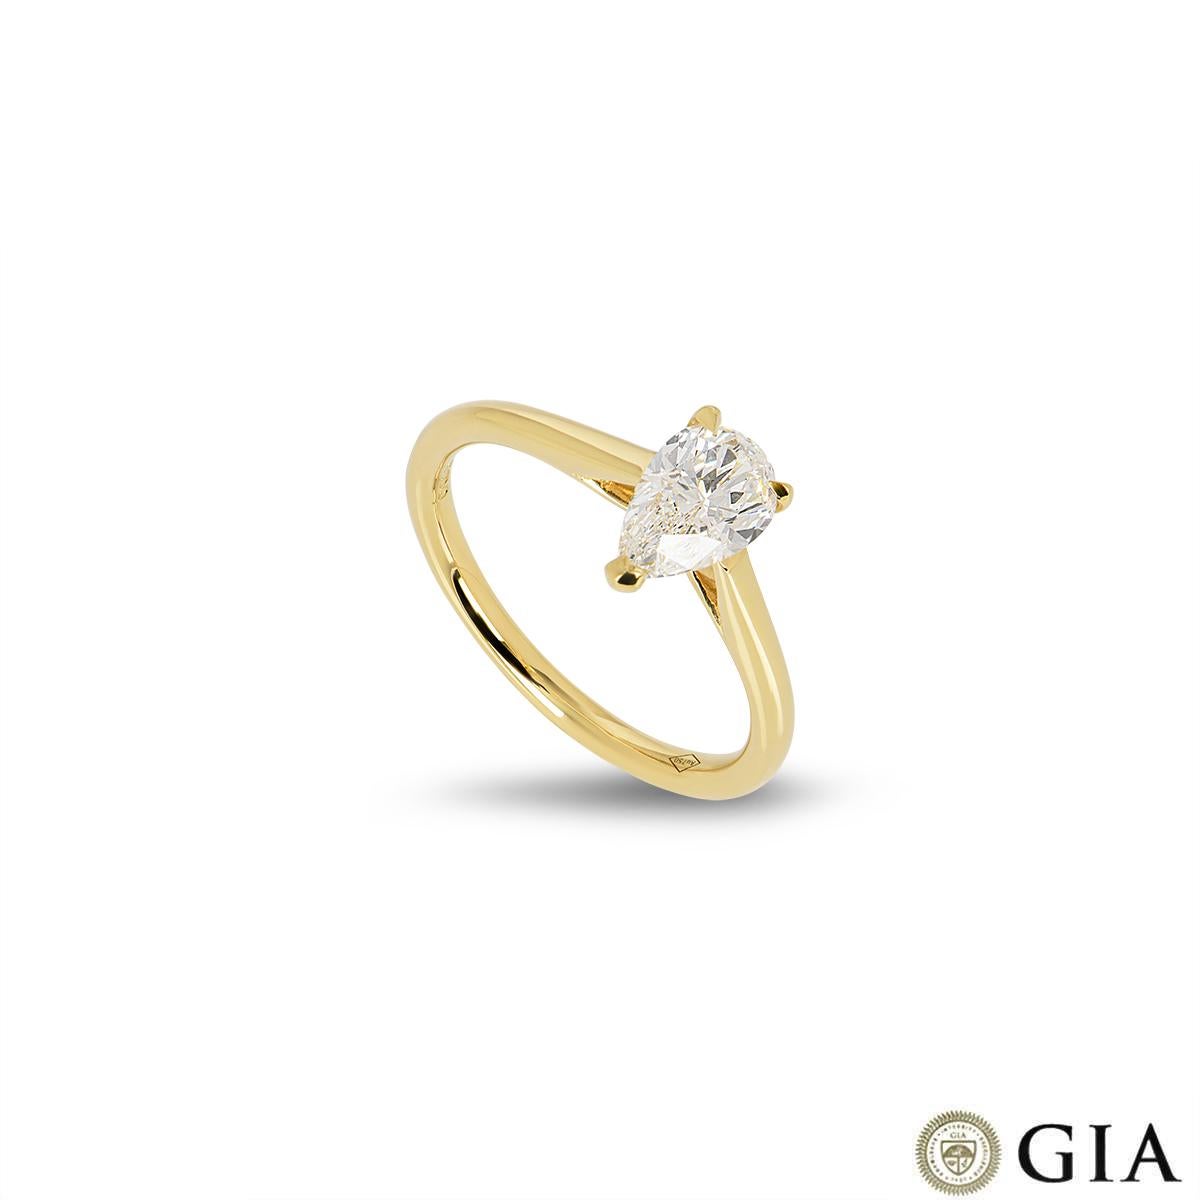 GIA Certified Yellow Gold Pear Cut Diamond Ring 0.90ct F/VVS1 For Sale 3